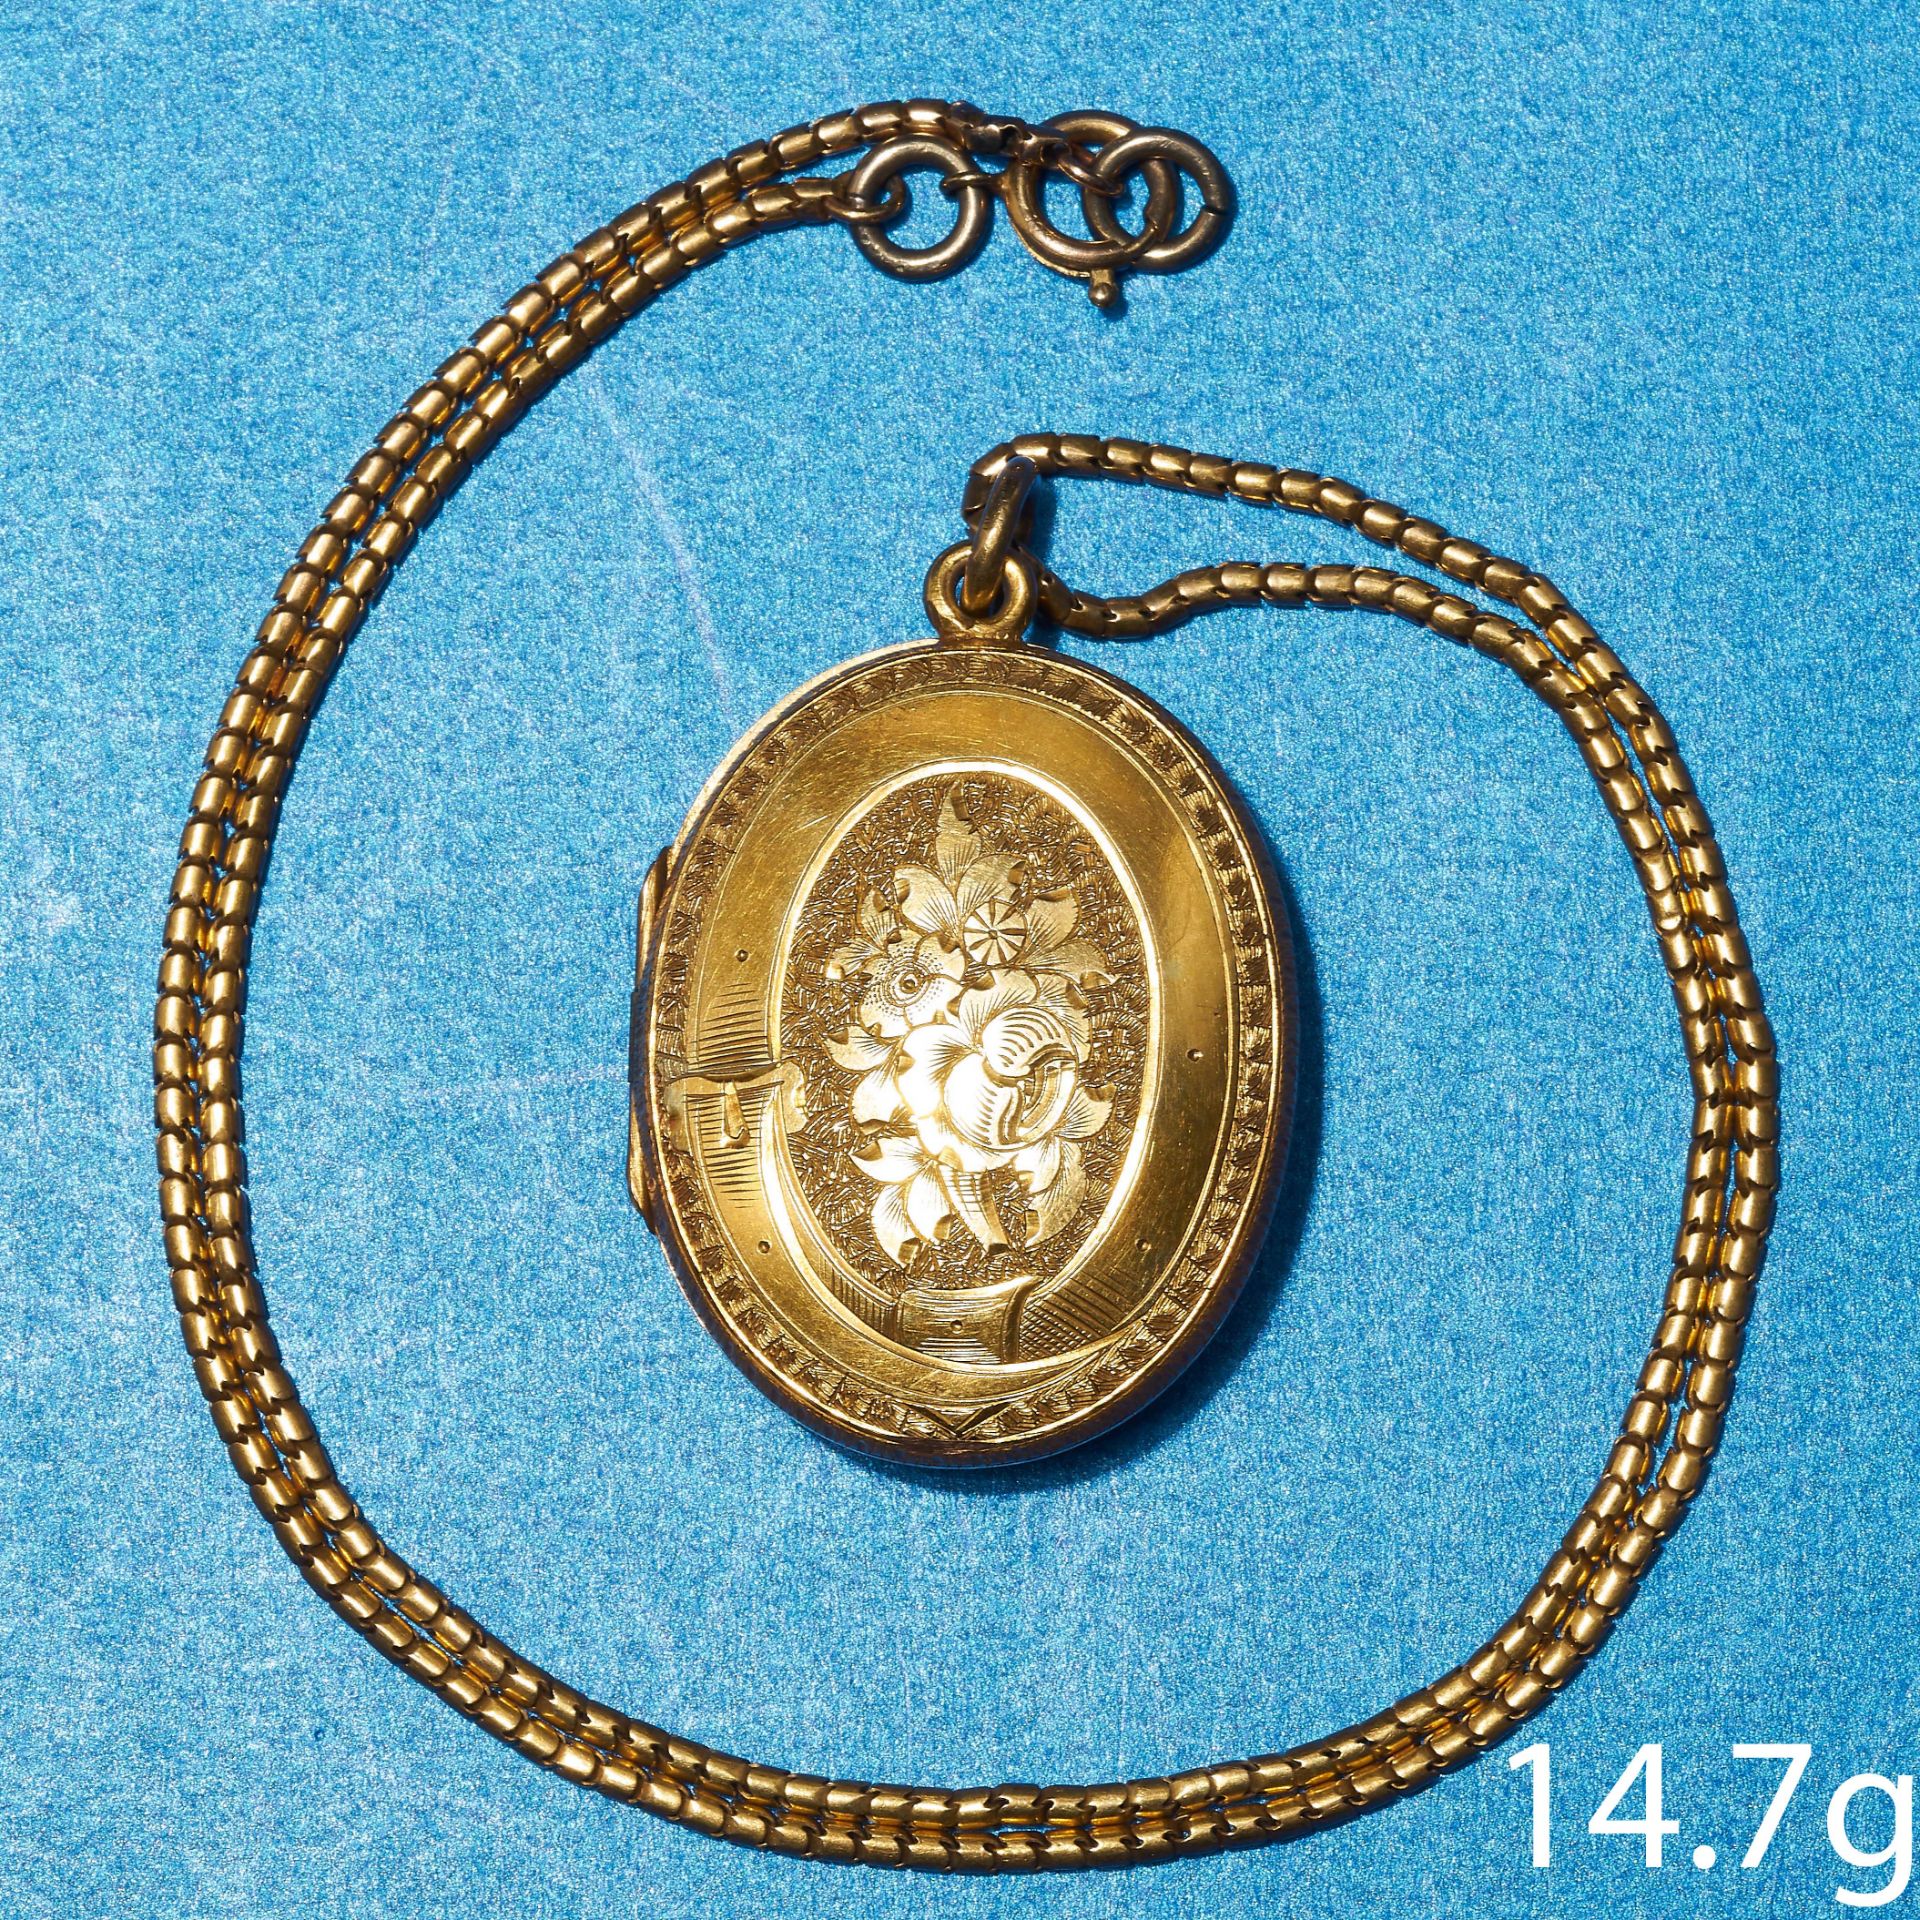 VICTORIAN GOLD DOUBLE SIDED ENGRAVED LOCKET PENDANT WITH GOLD NECKLACE